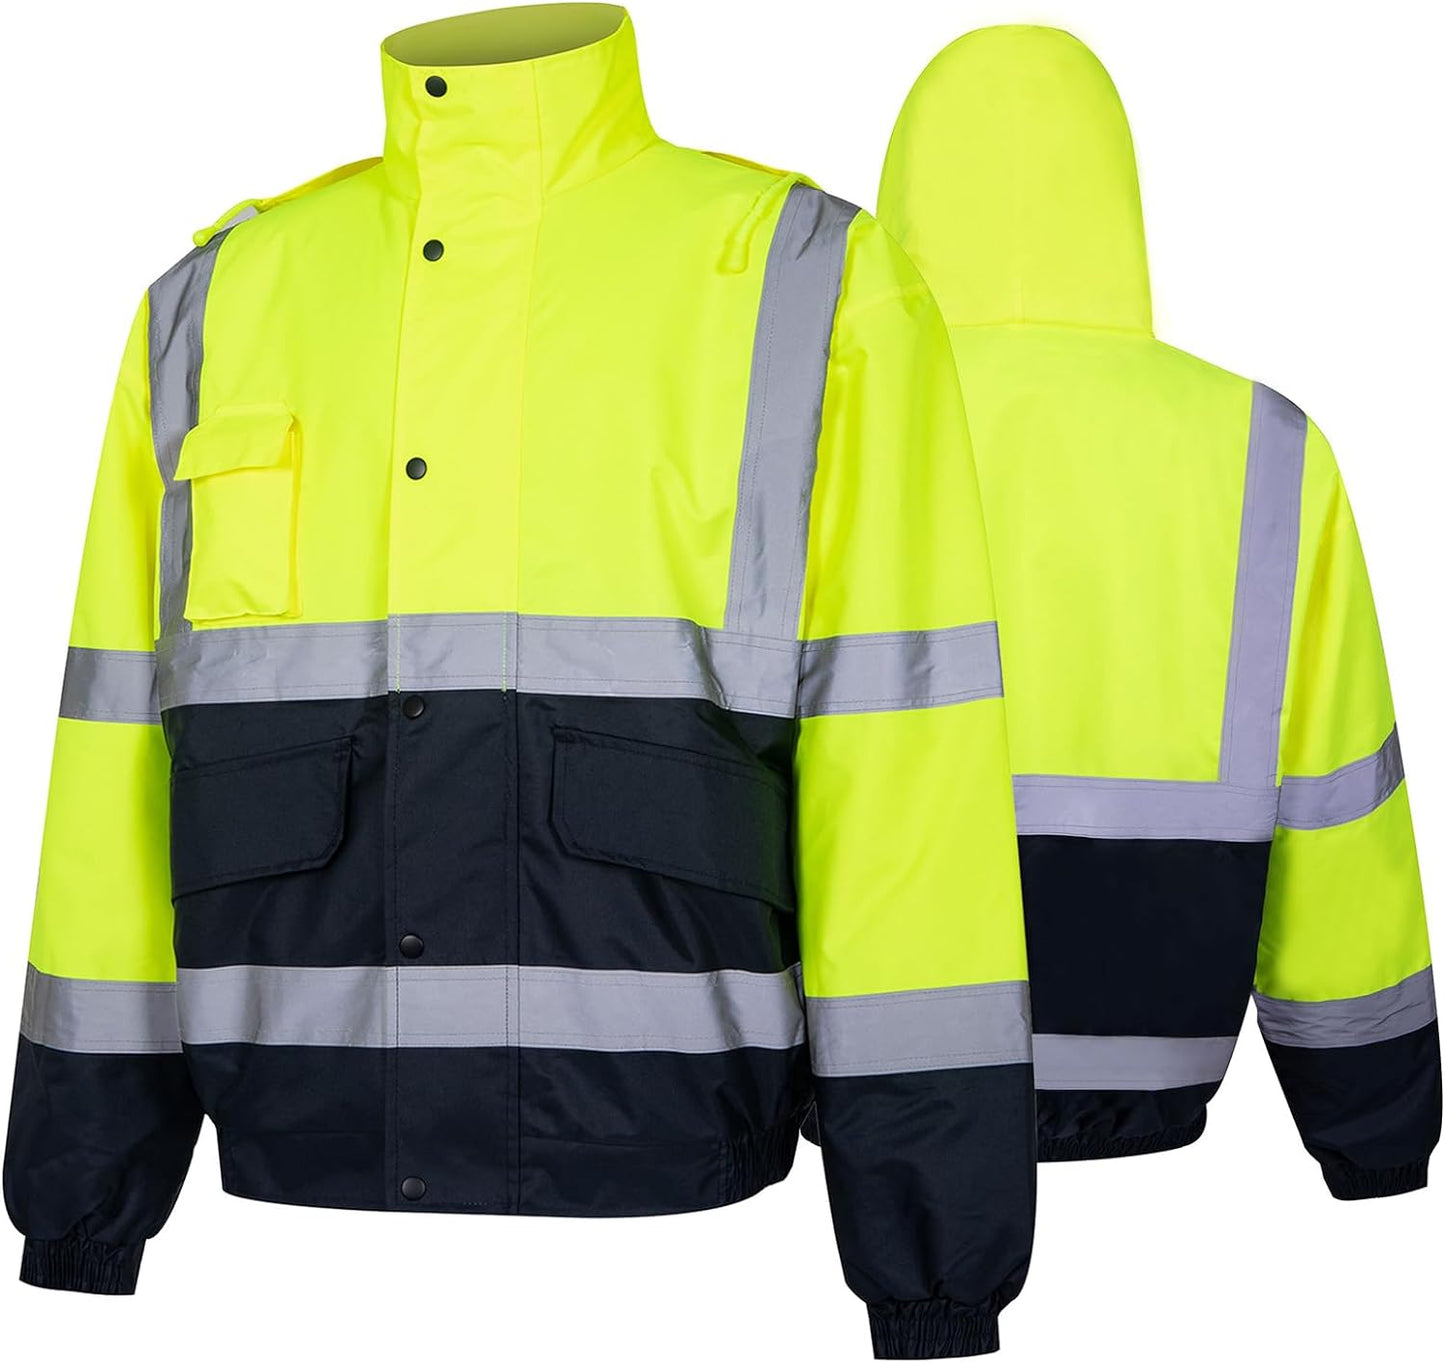 OMOTIYA Hi Vis Men, Reflective Safety Jacket Yellow High Visibility Zippered Work Construction Coats in Cold Weather